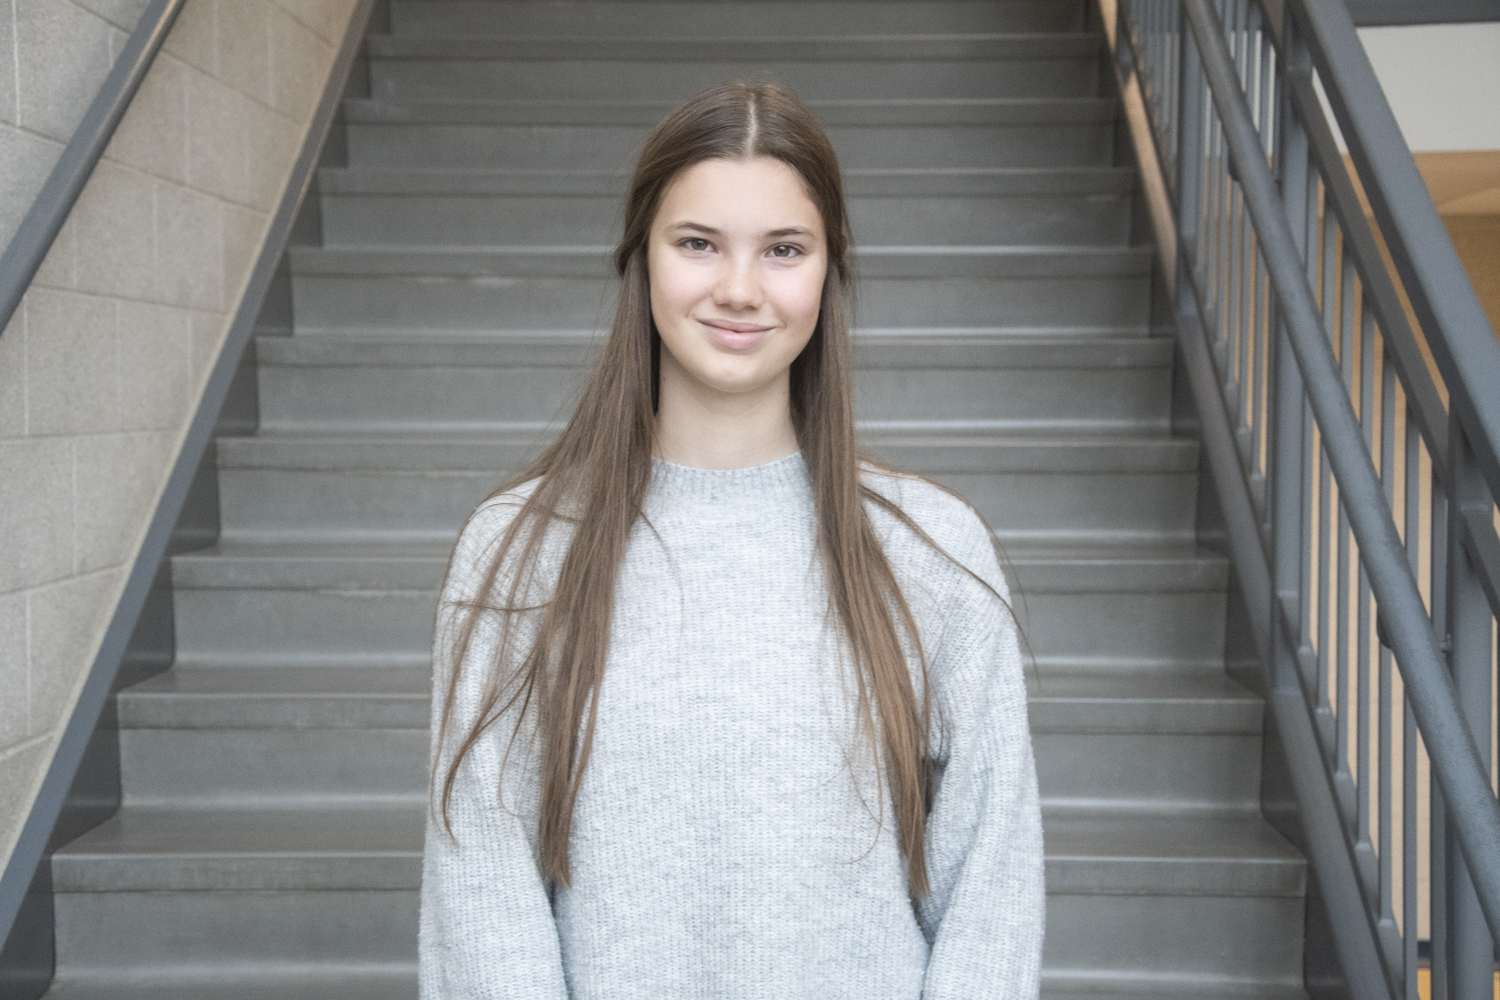 Student at Lycee St. Andre in Villeneuve D’Ascq, Manon Dubruque, 15